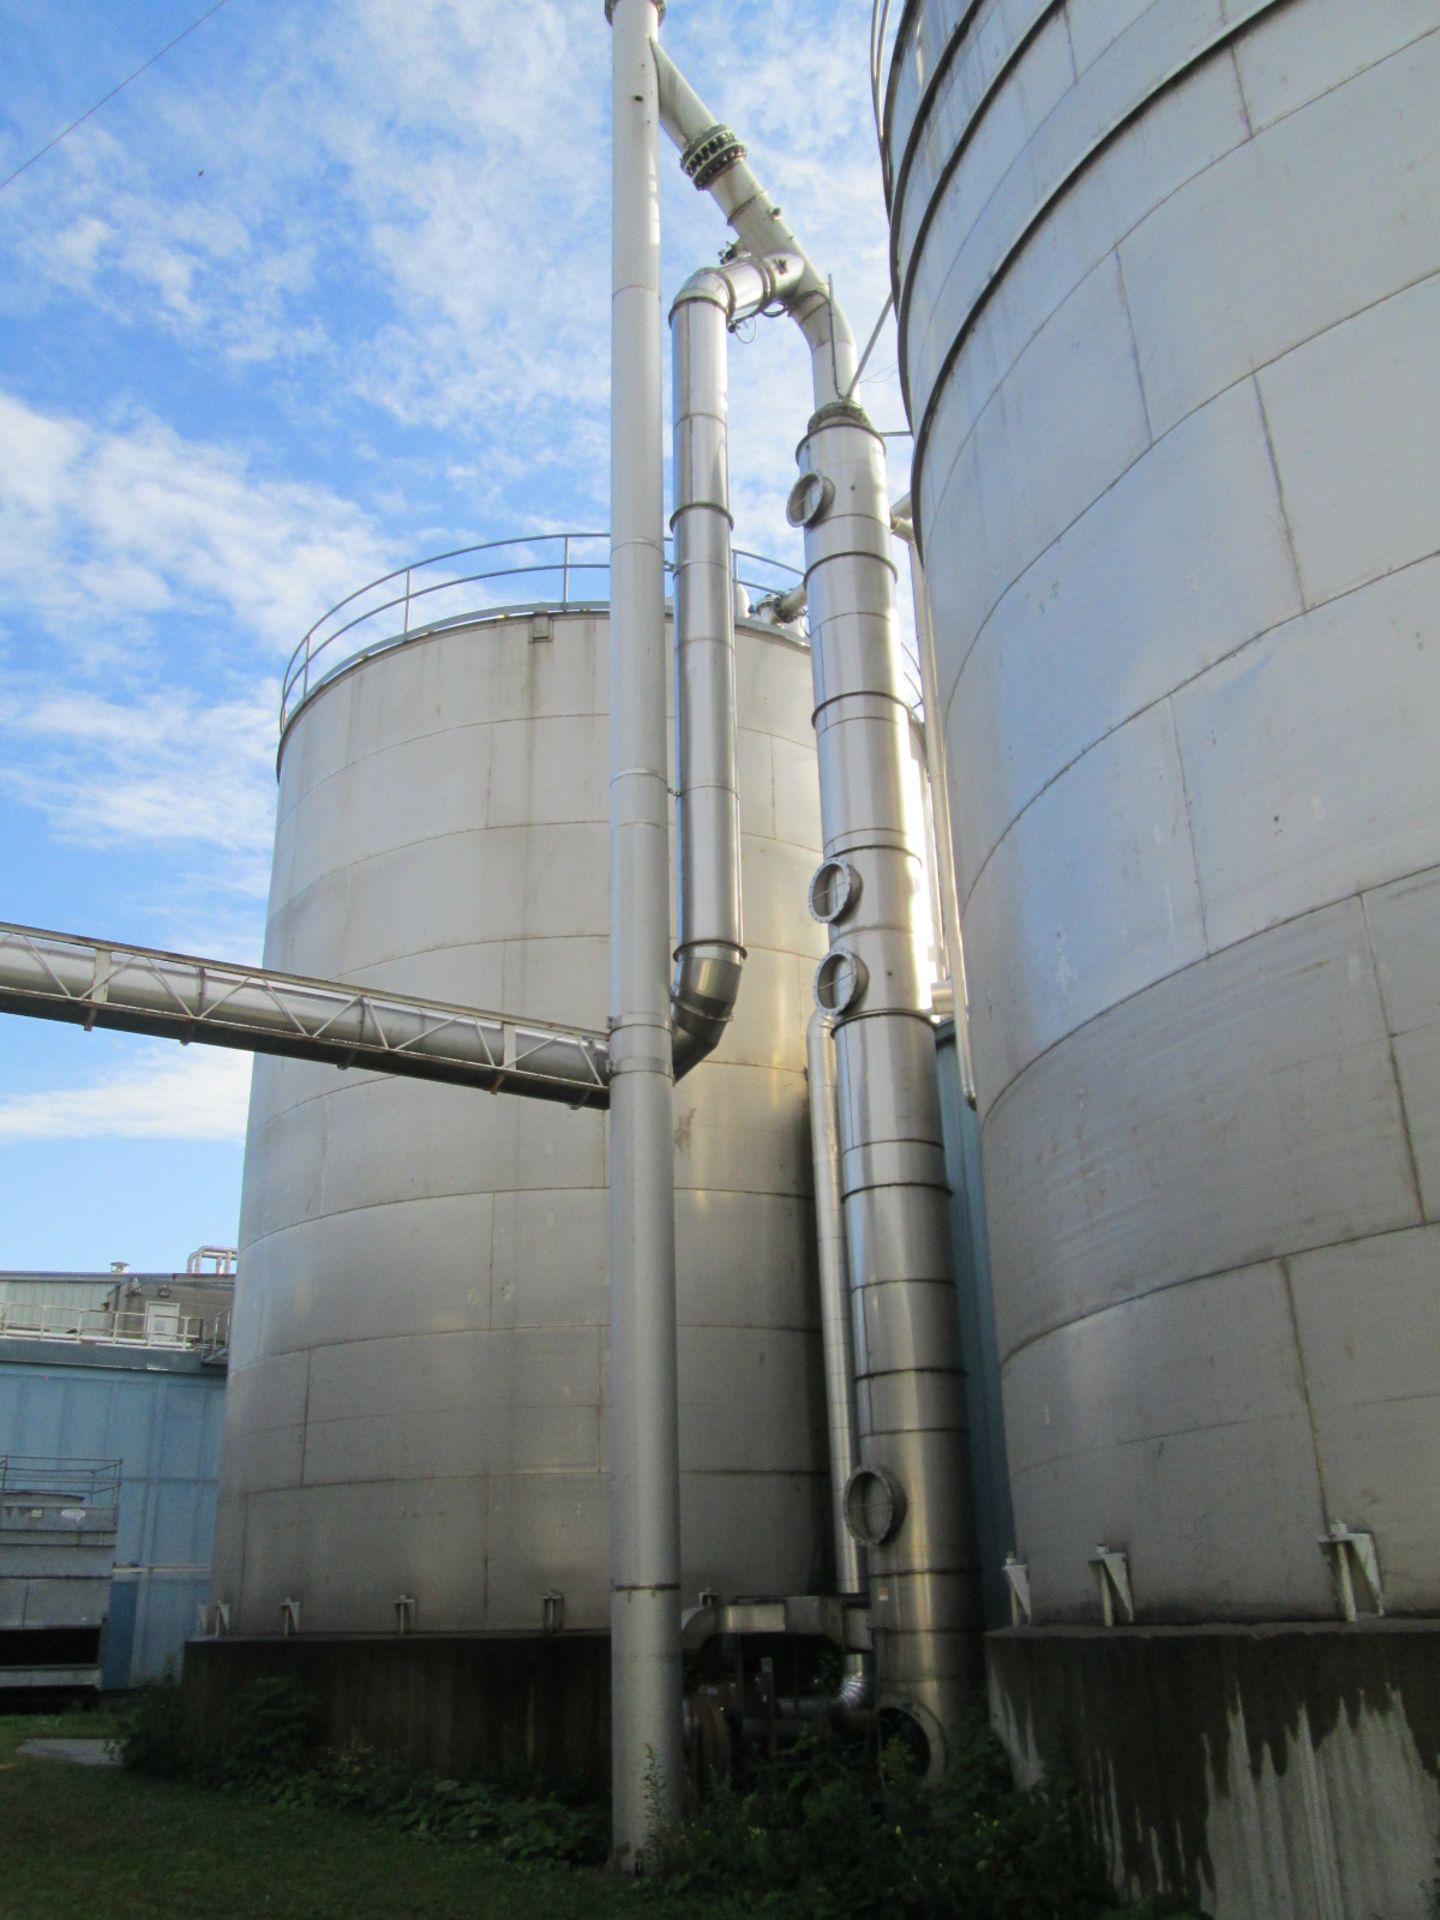 C02 Scrubber with Blowers and Stainless Steel Column and Exhaust Stack - Image 20 of 22